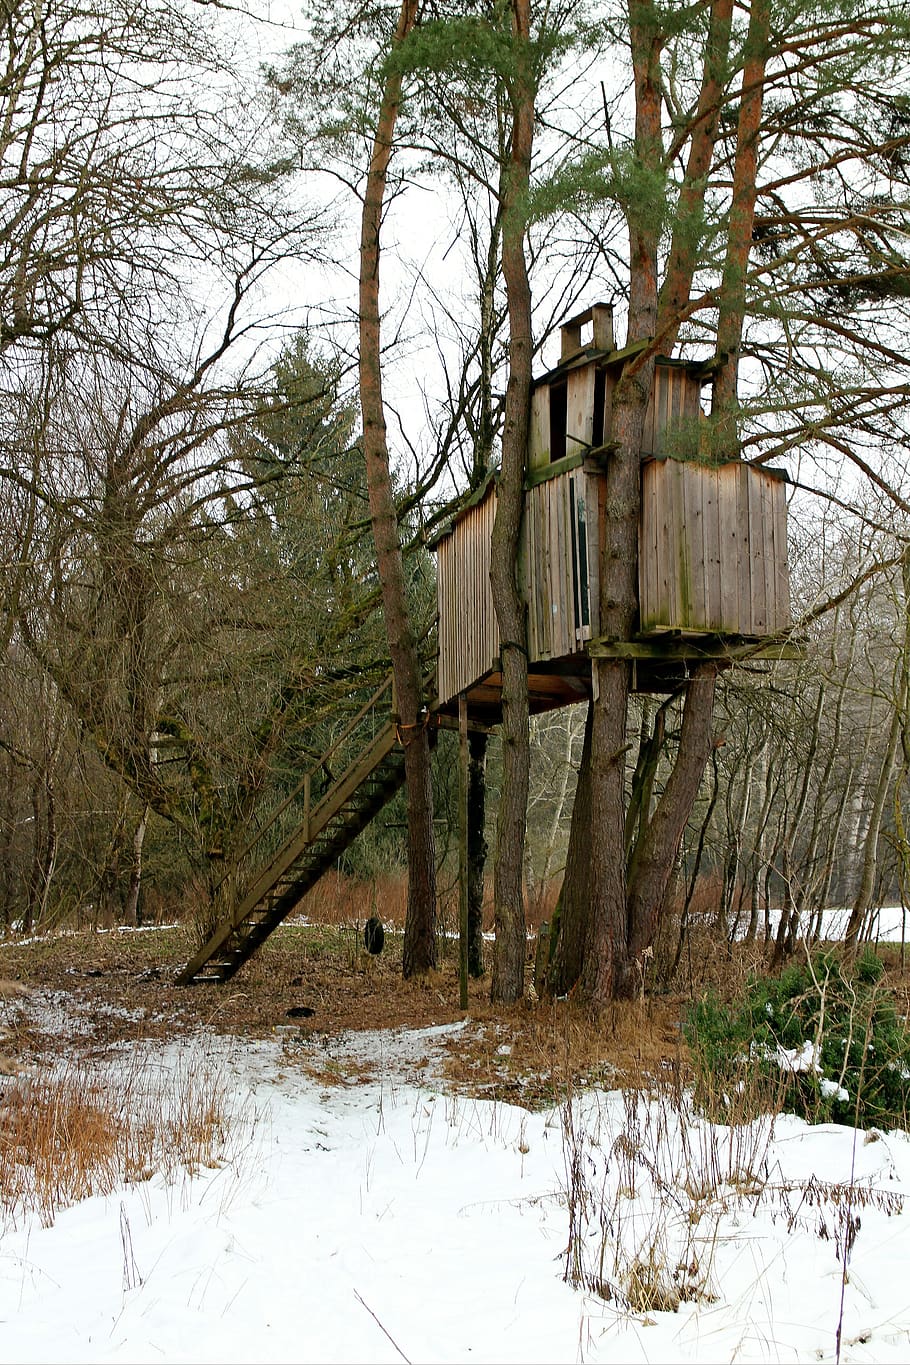 treehouse, tree, tree hut, woodhouse, retreat, play, nature, snow, winter, cold temperature